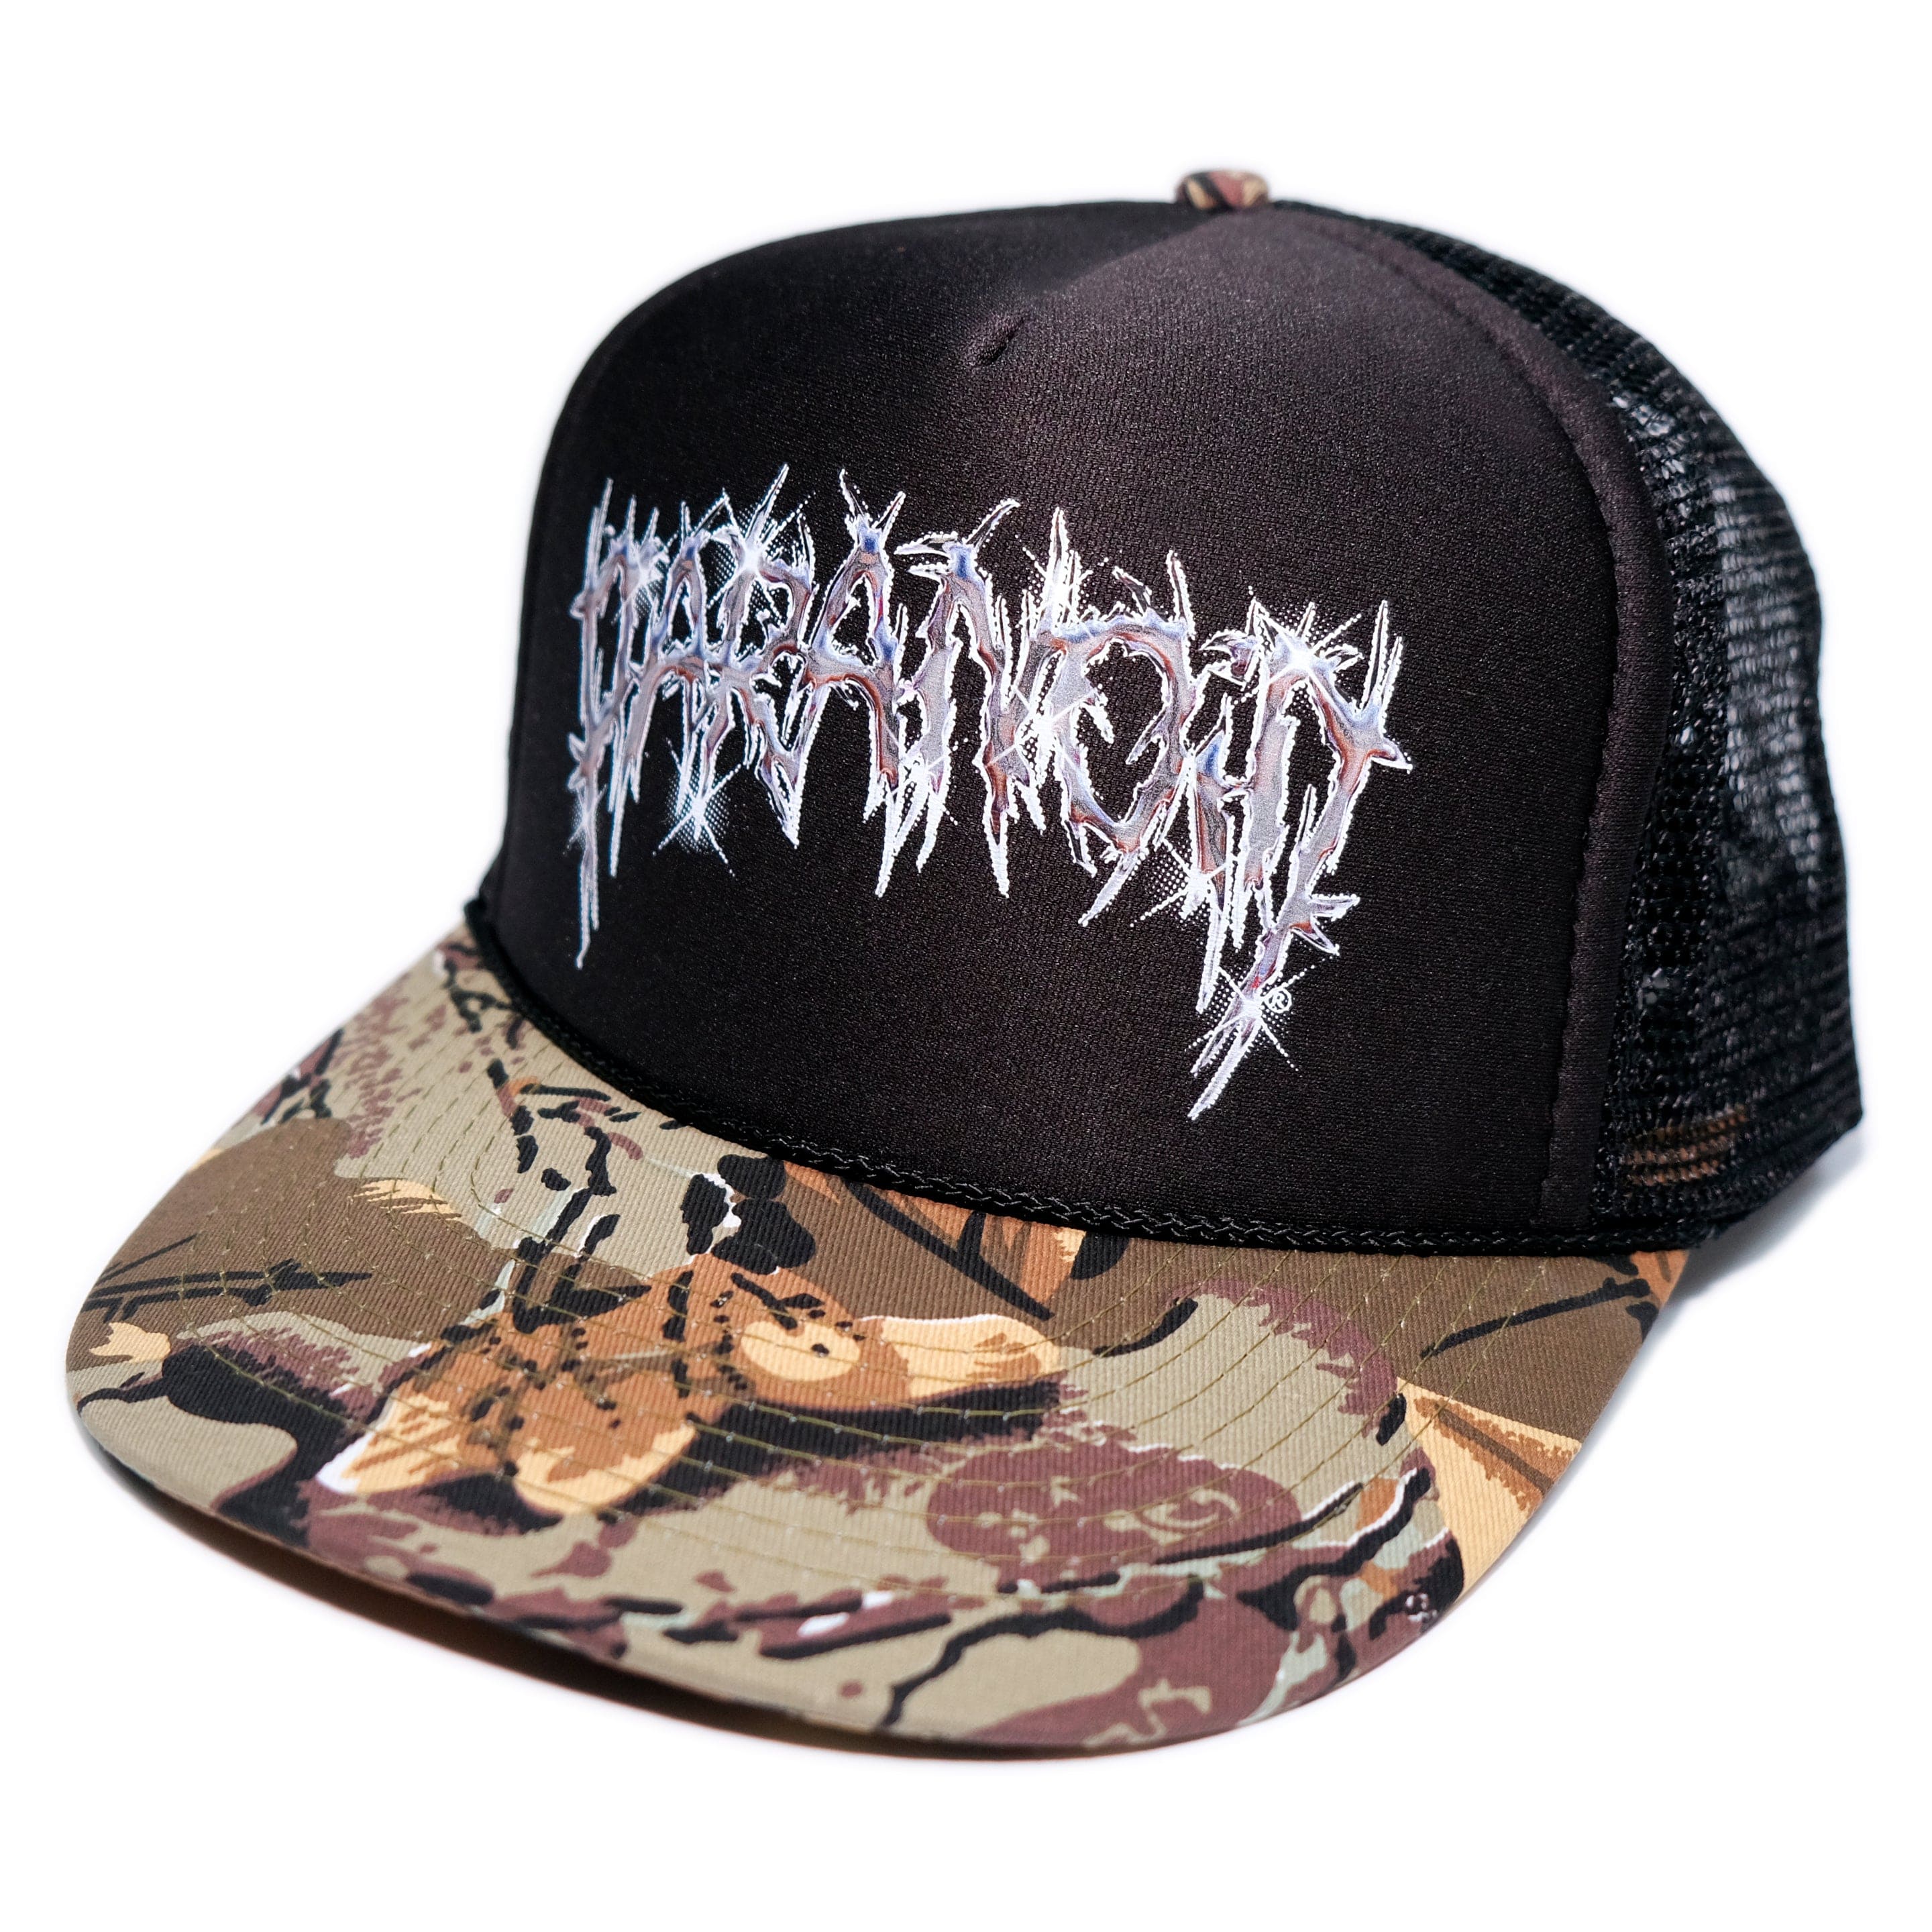 'CAMO AND CHROME' TRUCKER HAT